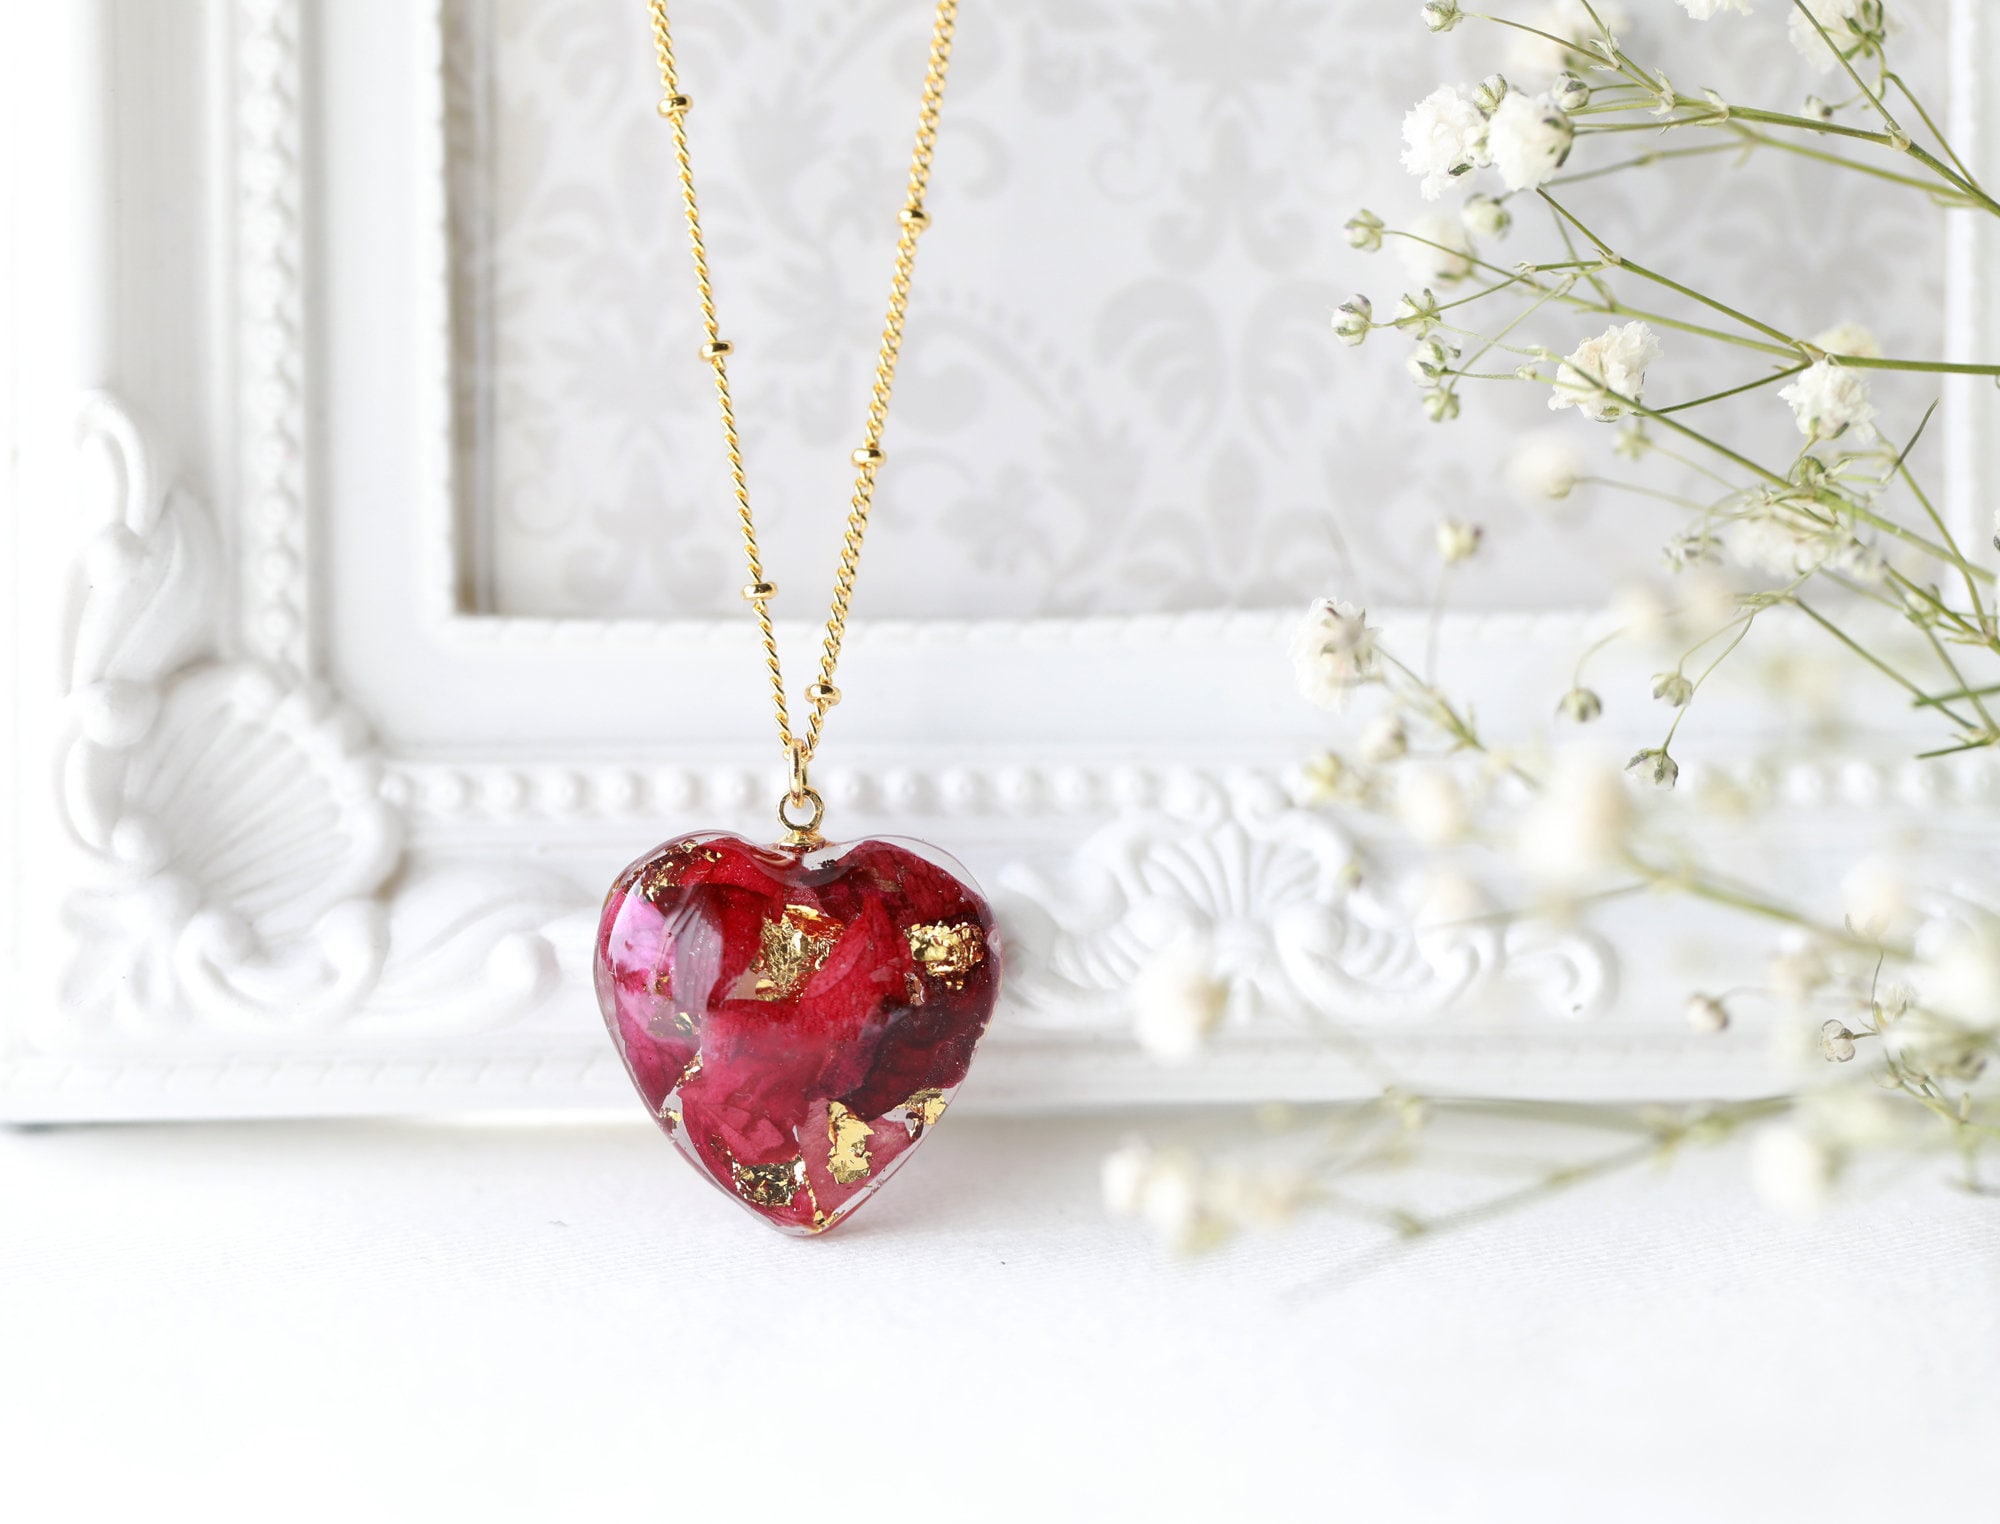 Resin with Thermochromic Pigment, Heart Pendant and Necklace Set